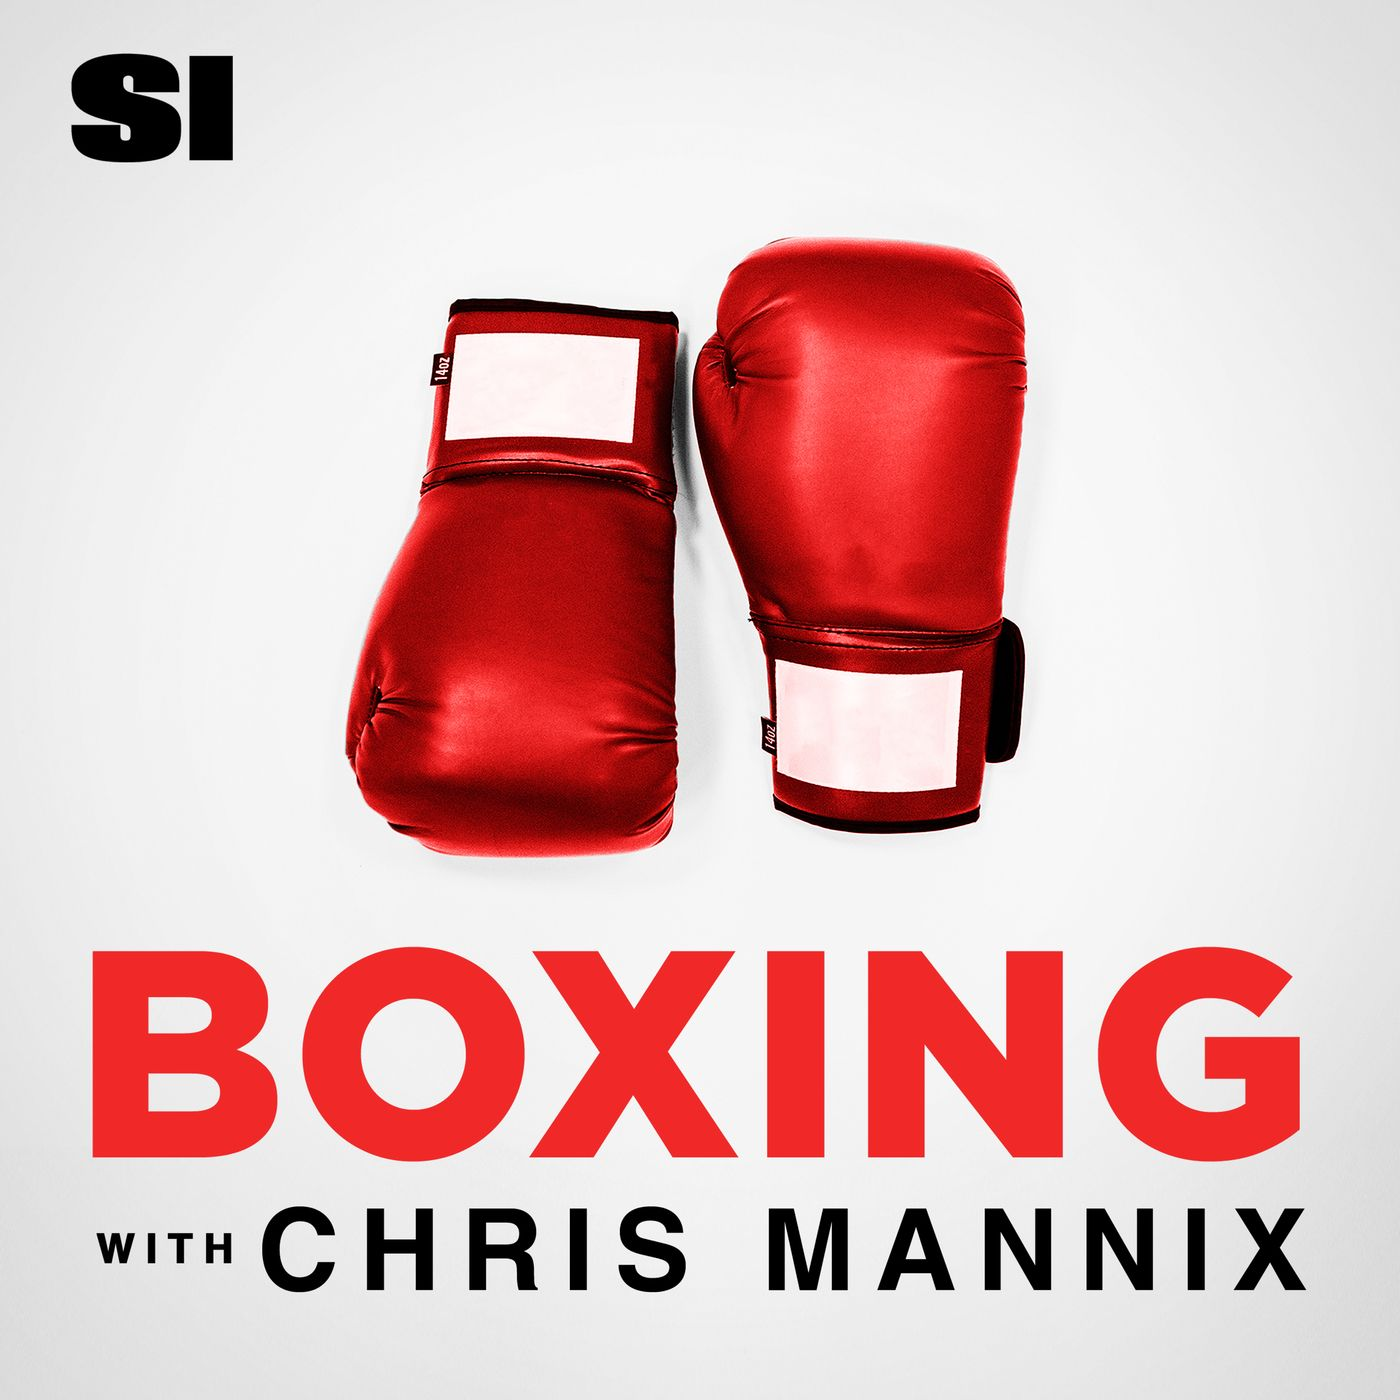 A highlight from Boxing with Chris Mannix - To Duck or not to Duck